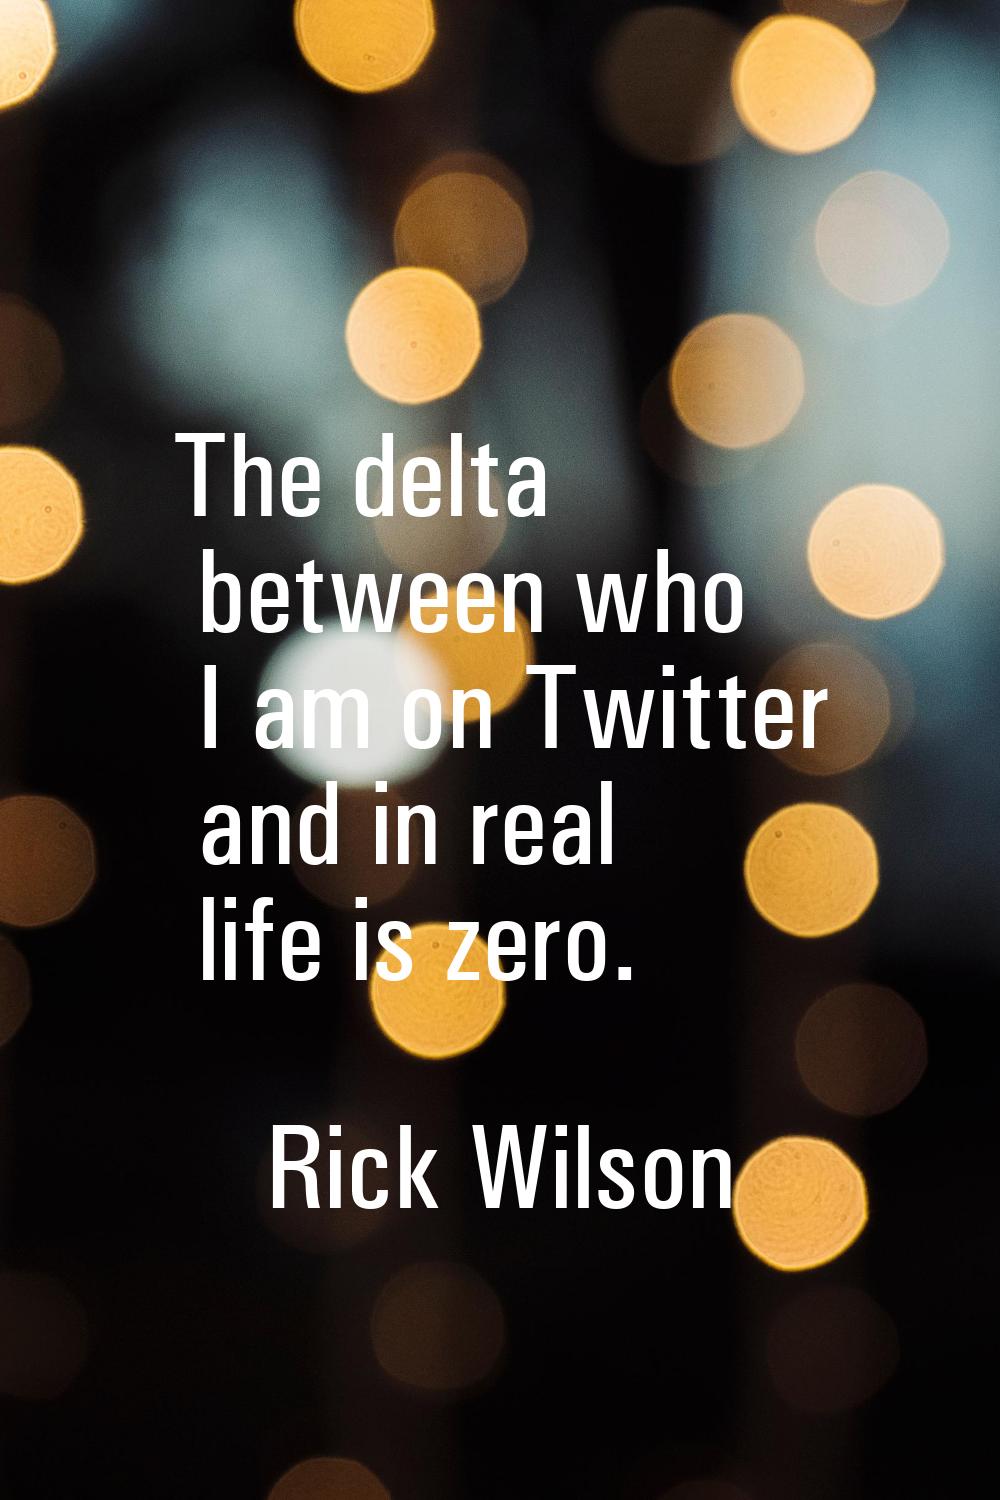 The delta between who I am on Twitter and in real life is zero.